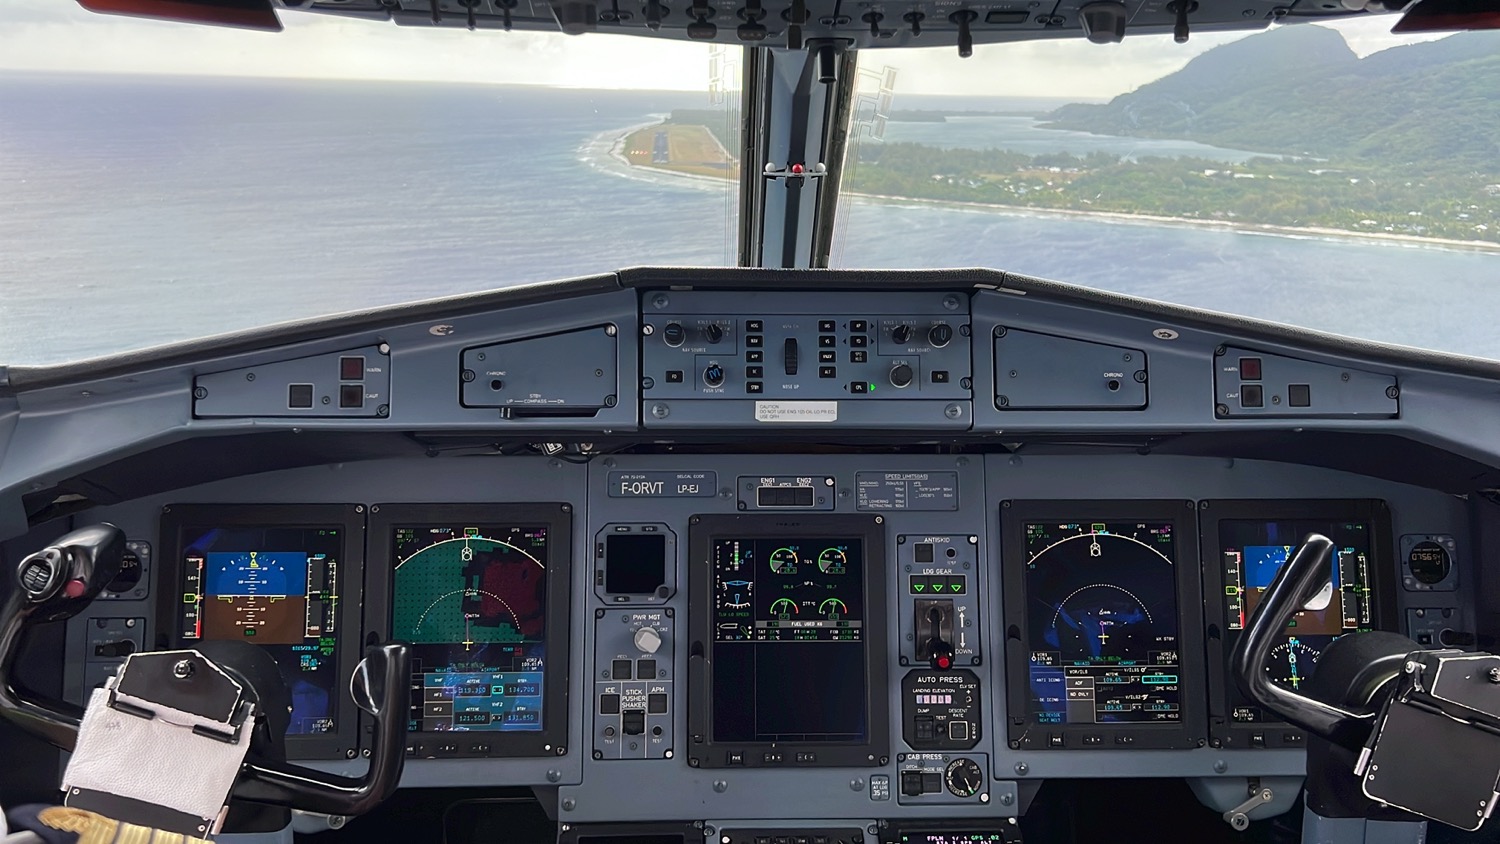 the cockpit of an airplane with a view of land and water